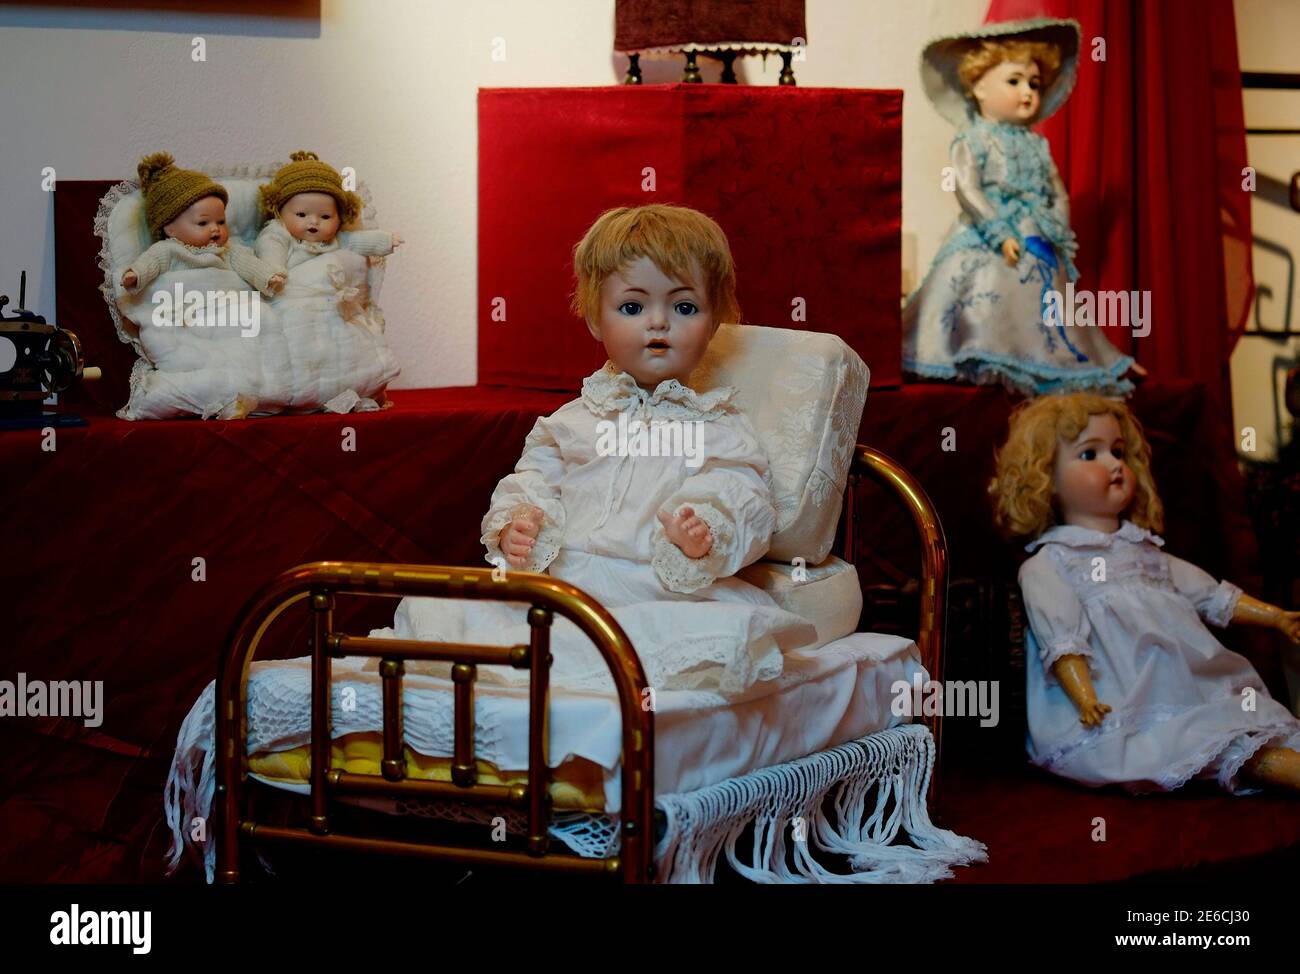 Doll Collector High Resolution Stock Photography and Images - Alamy